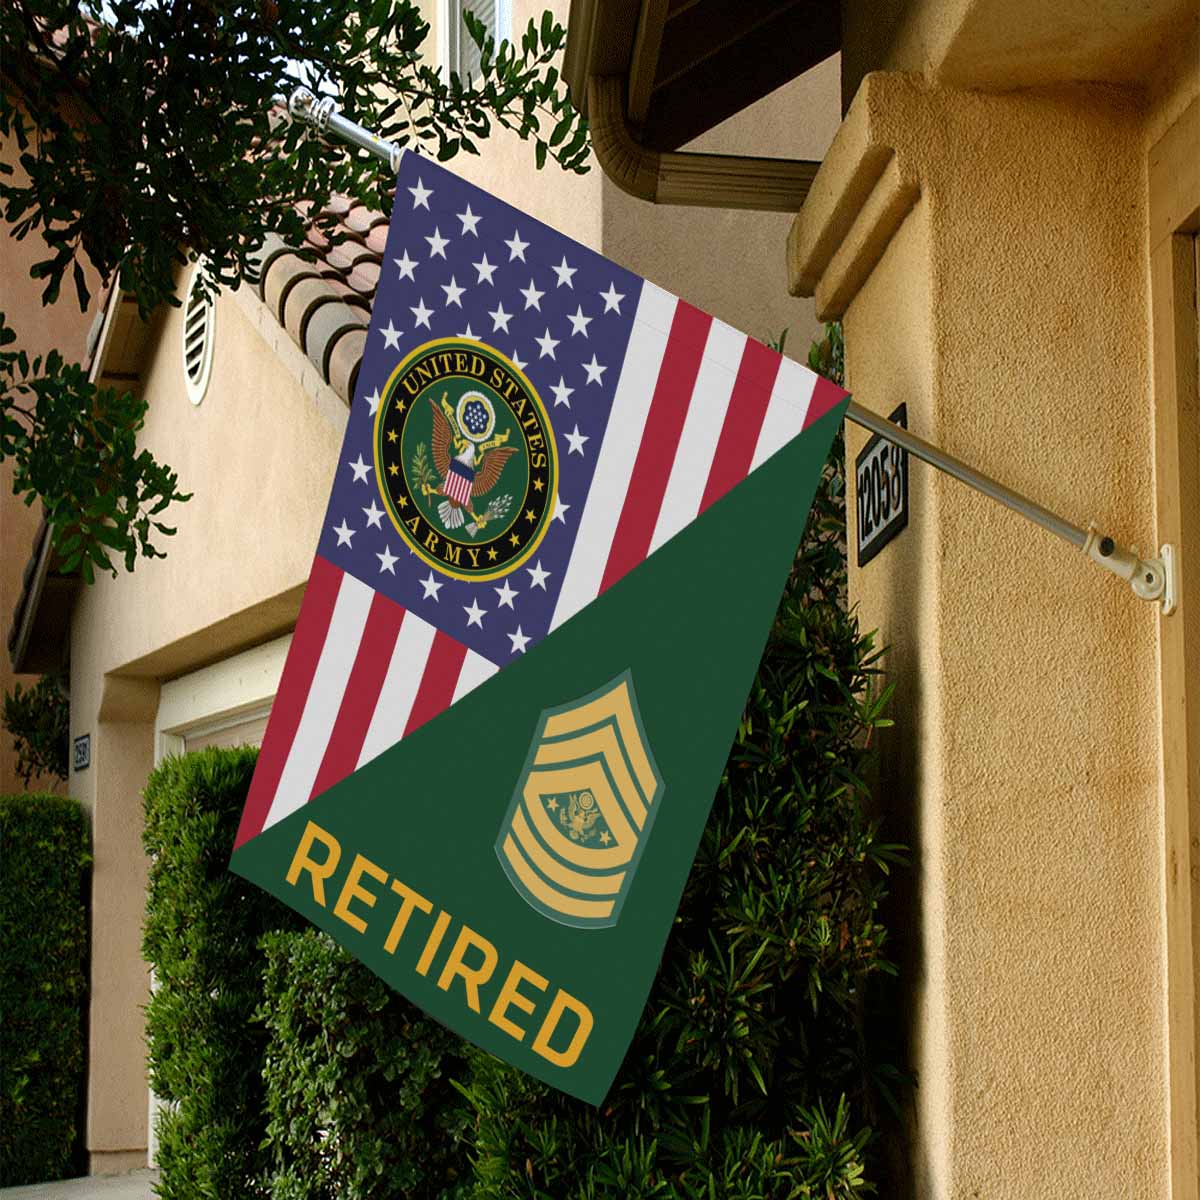 US Army E-9 Sergeant Major of the Army E9 SMA Retired House Flag 28 Inch x 40 Inch 2-Side Printing-HouseFlag-Army-Ranks-Veterans Nation